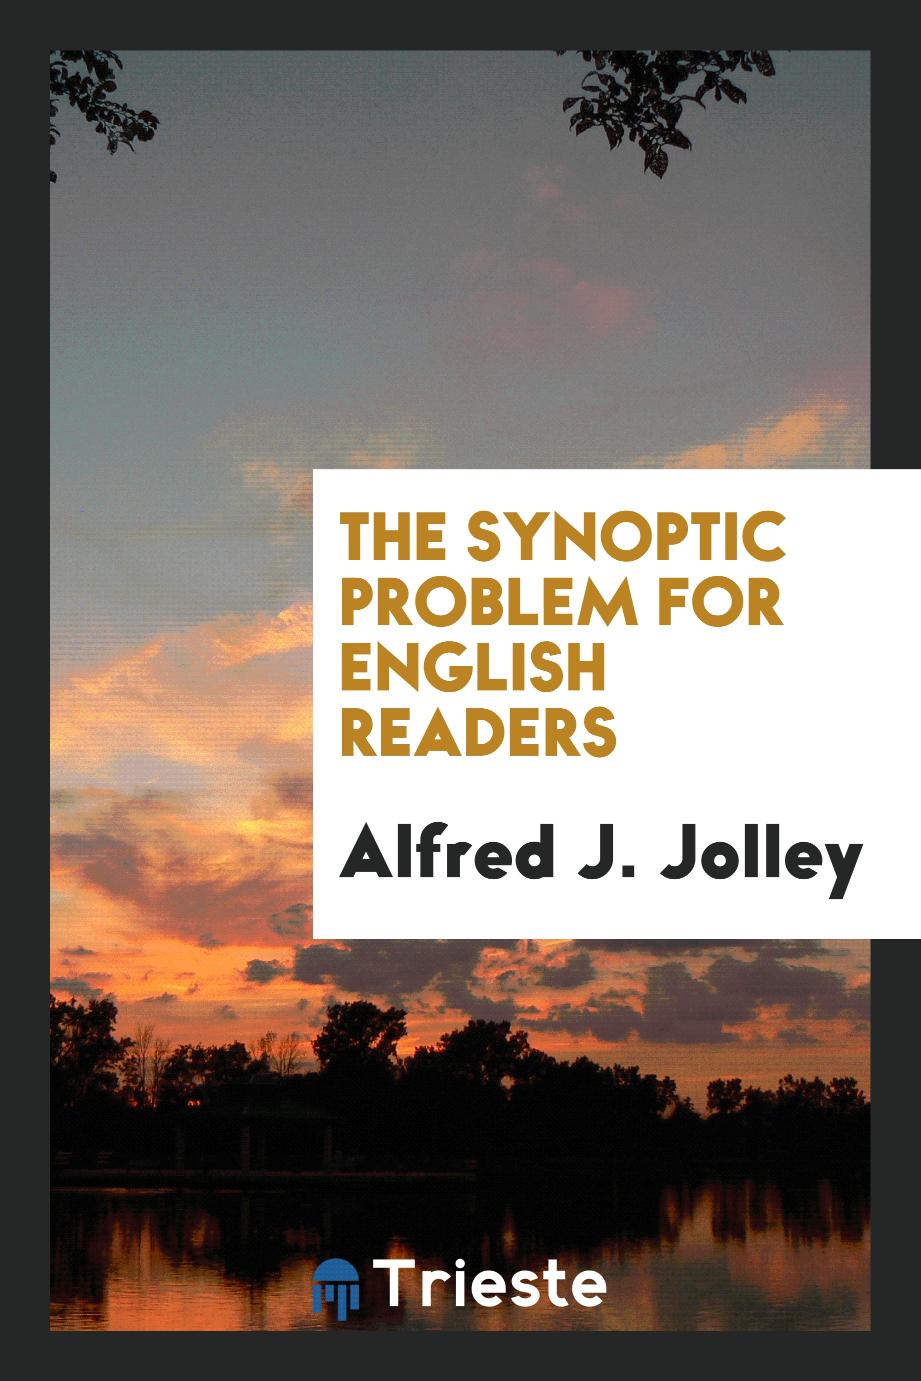 The Synoptic Problem for English Readers